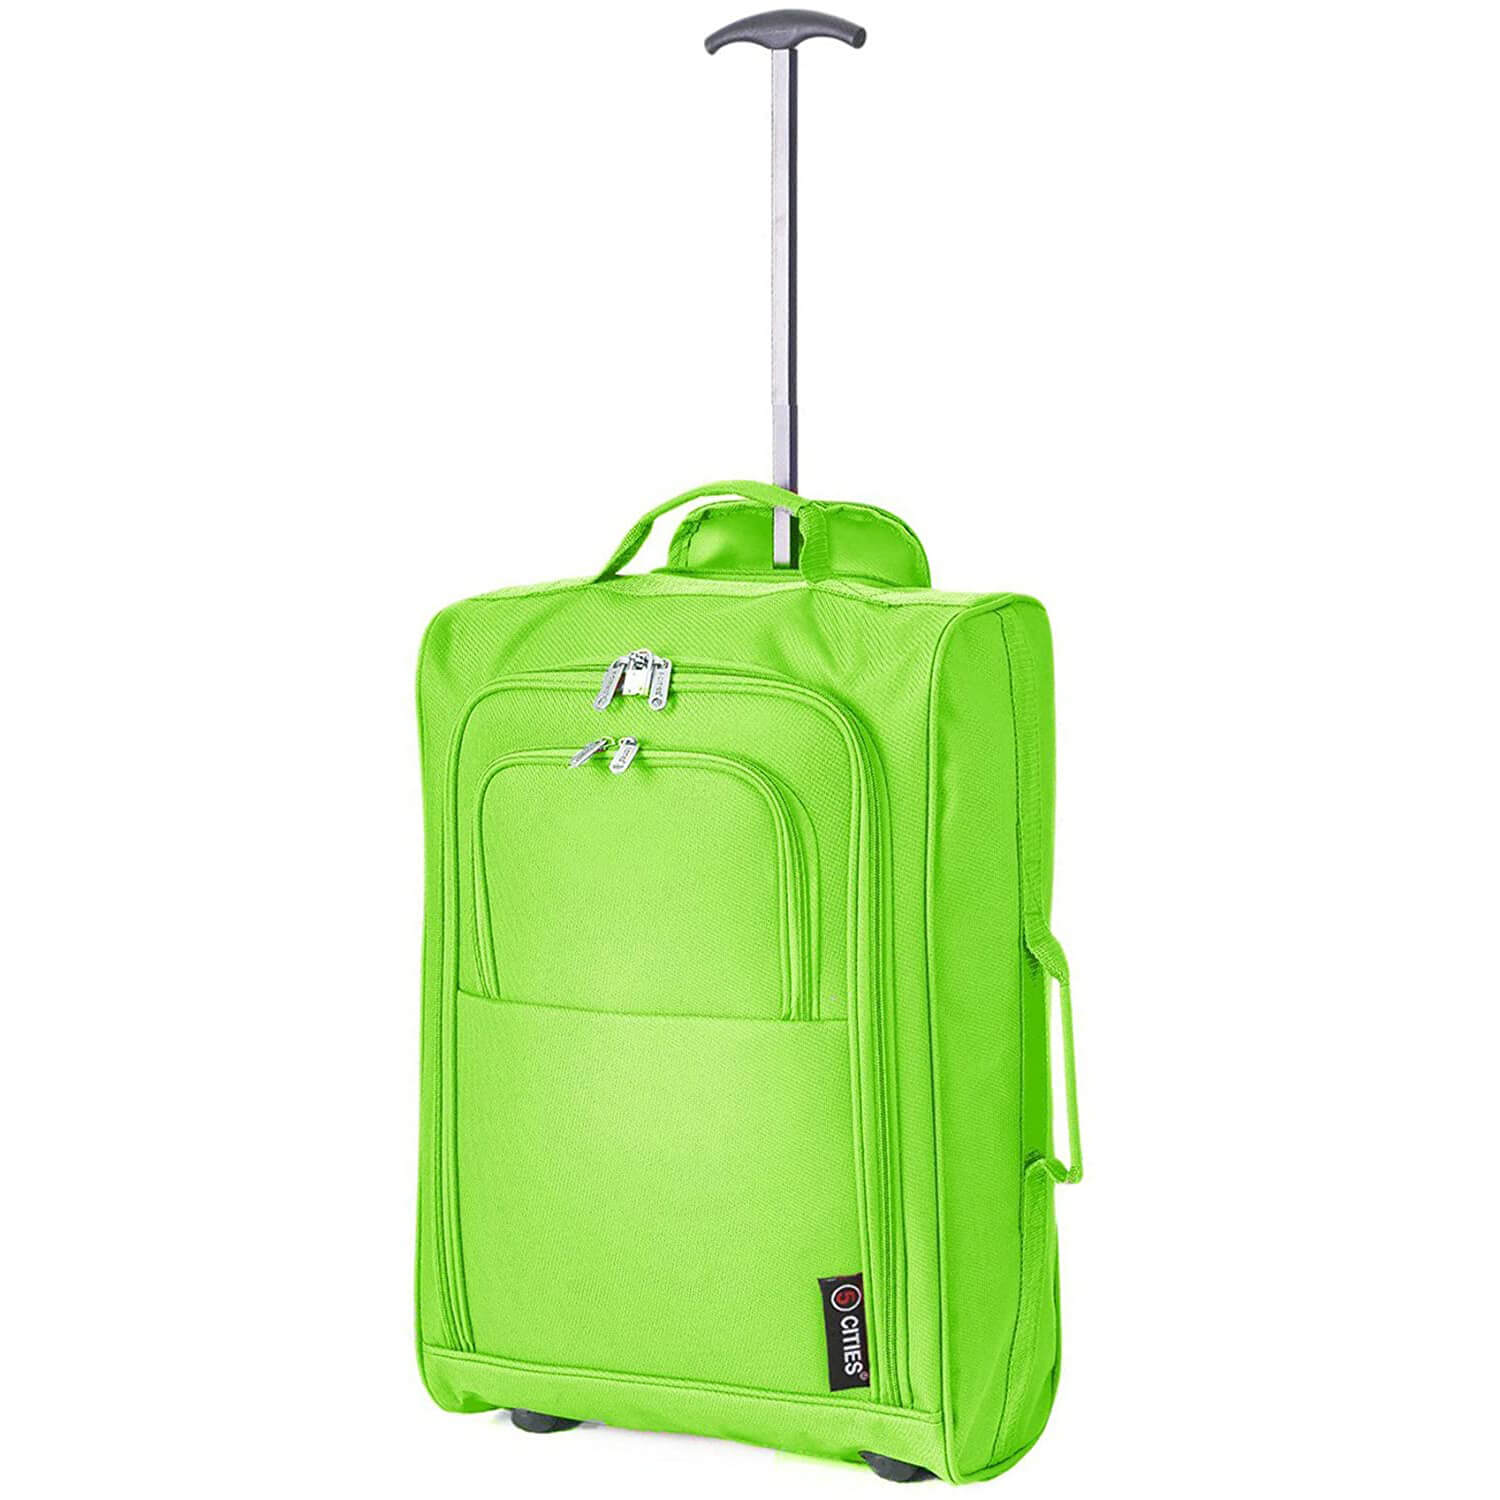 Buy Feelings Shopping Trolley Bag With Wheels Green Online - Shop Home &  Garden on Carrefour UAE